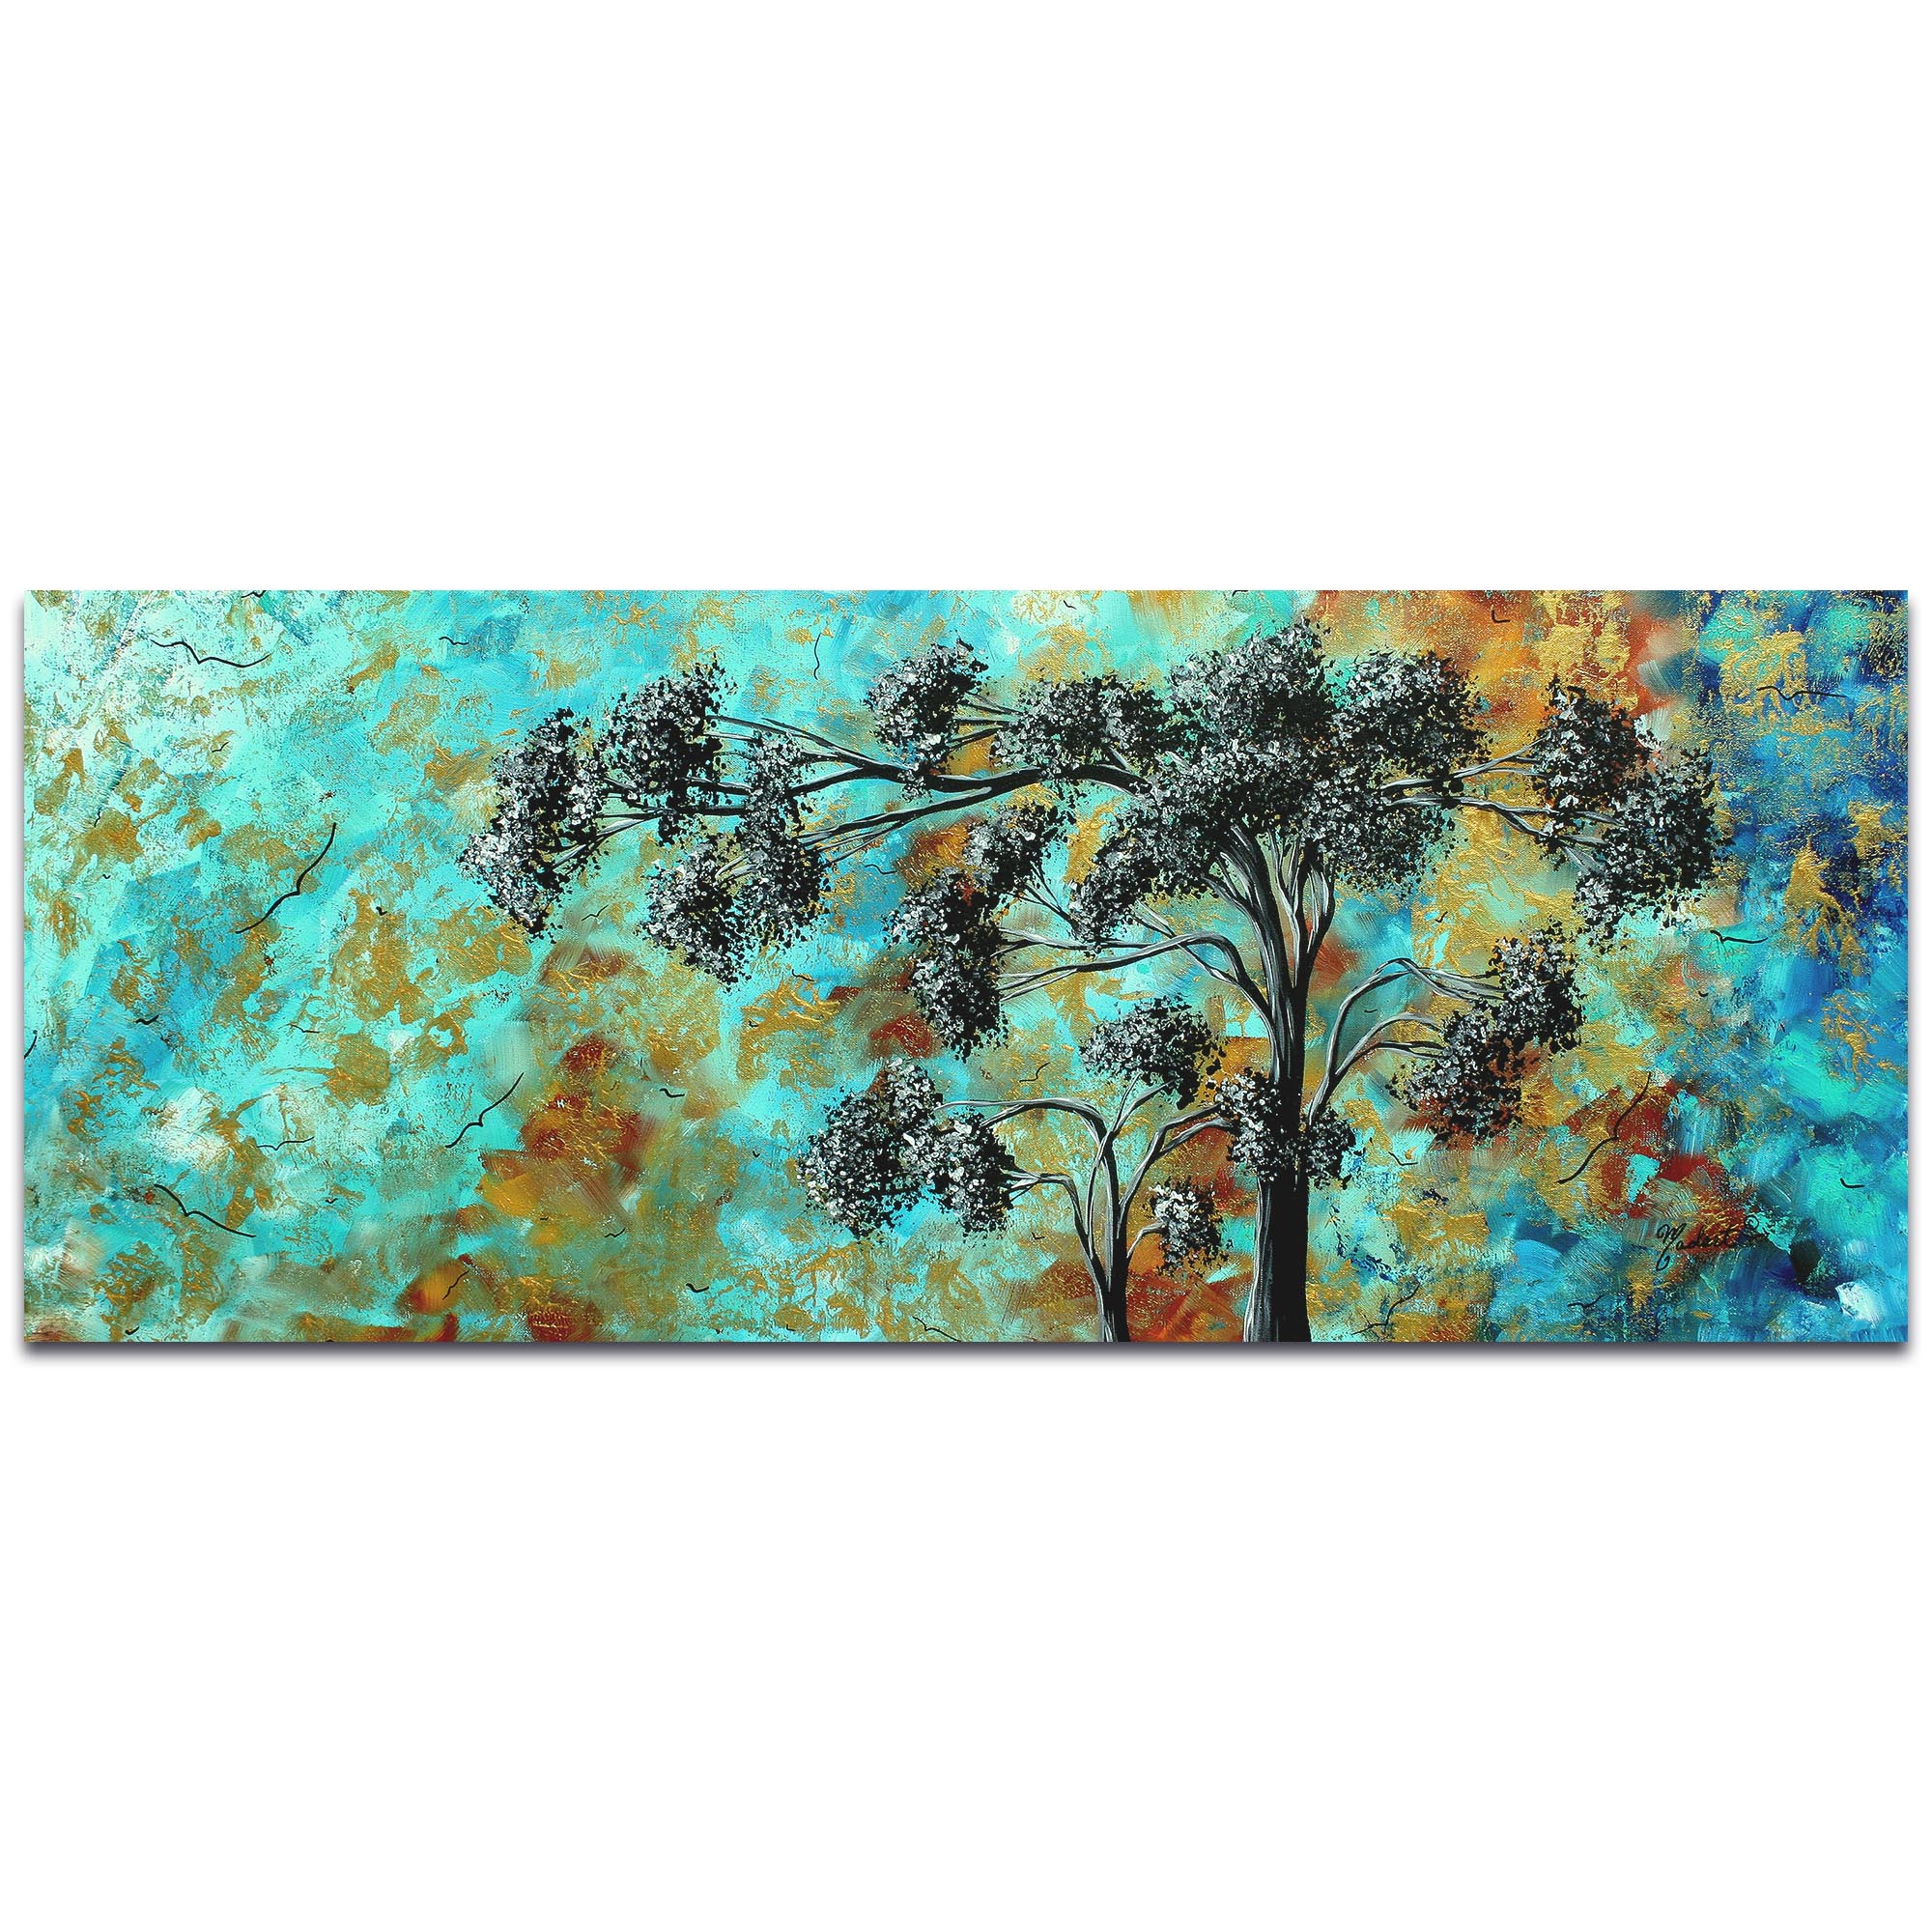 Landscape Painting 'Spring Blooms' - Abstract Tree Art on Metal or Acrylic